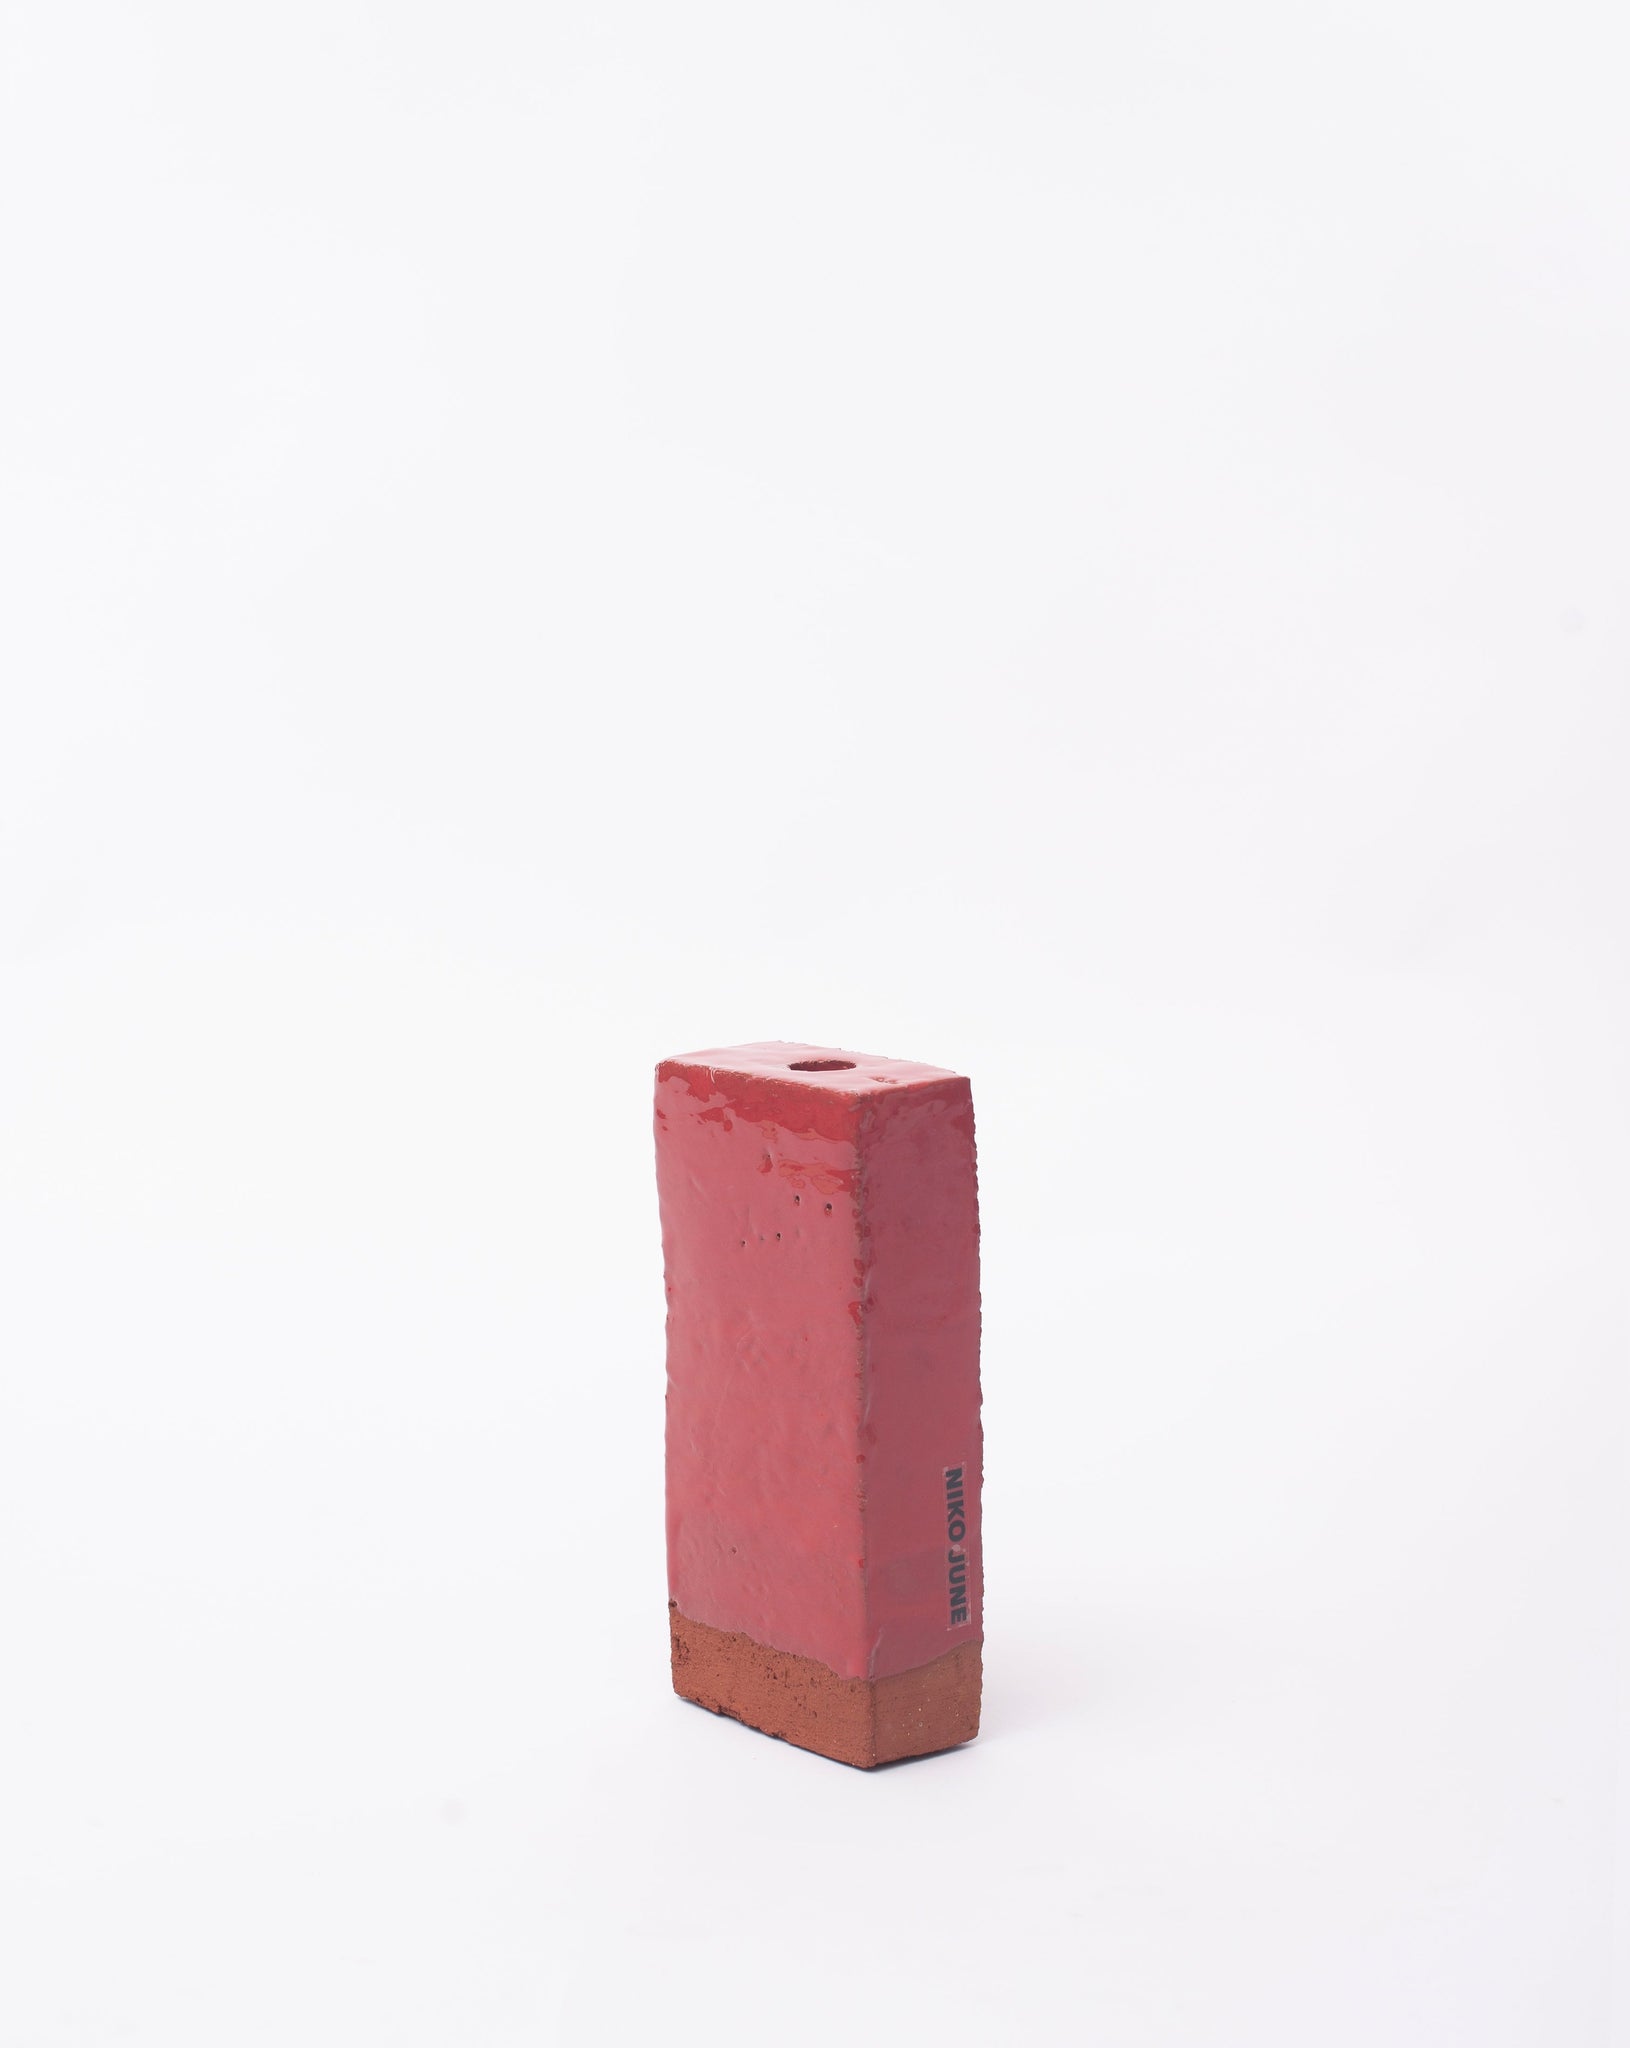 Handmade red brick ceramic candle holder in white glaze in white background with right side view